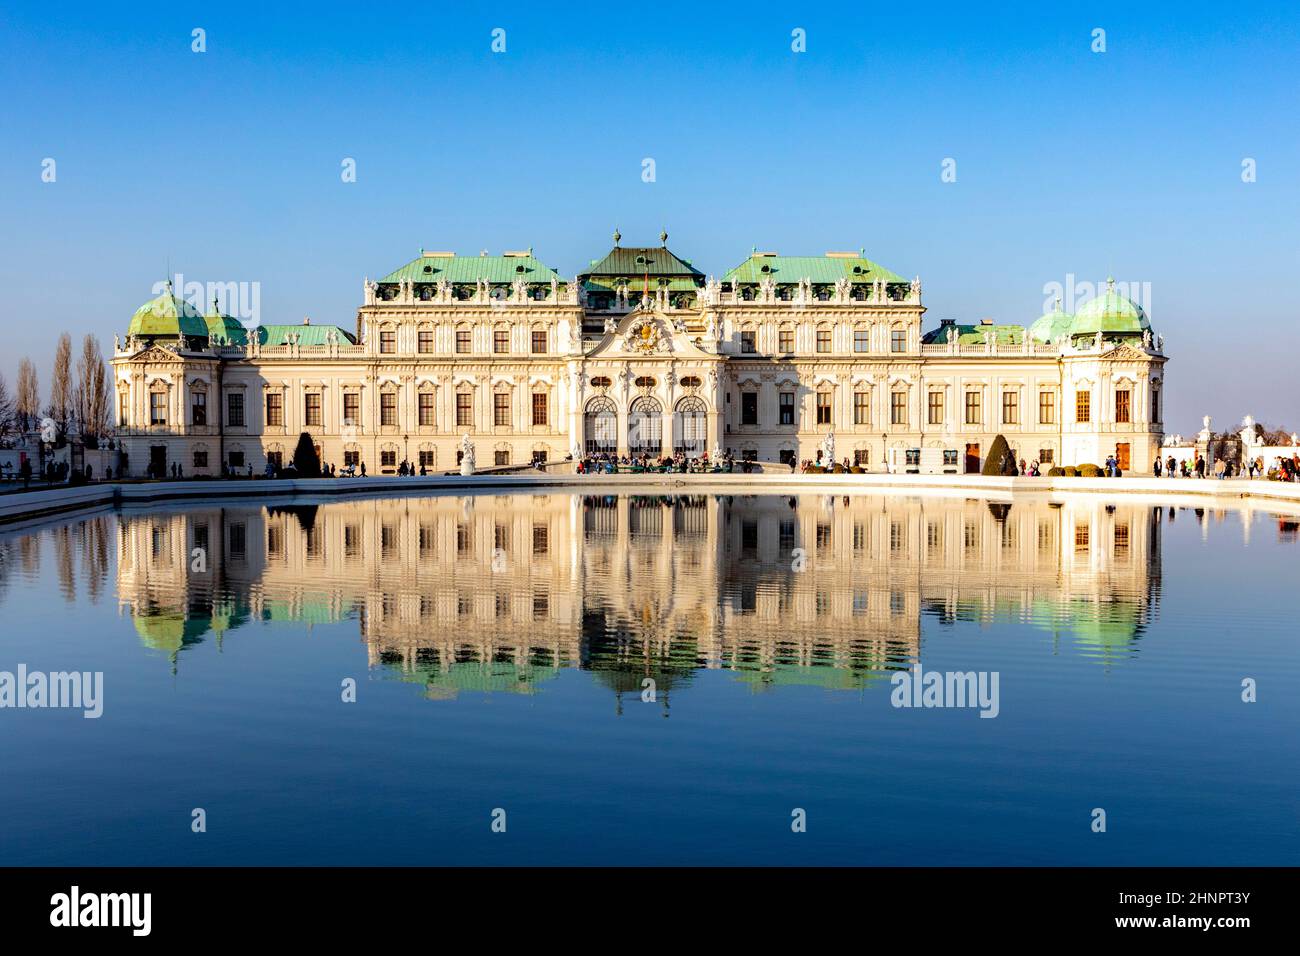 Baroque palace Belvedere is a historic building complex in Vienna, Austria, consisting of two Baroque palaces with garden between them Stock Photo